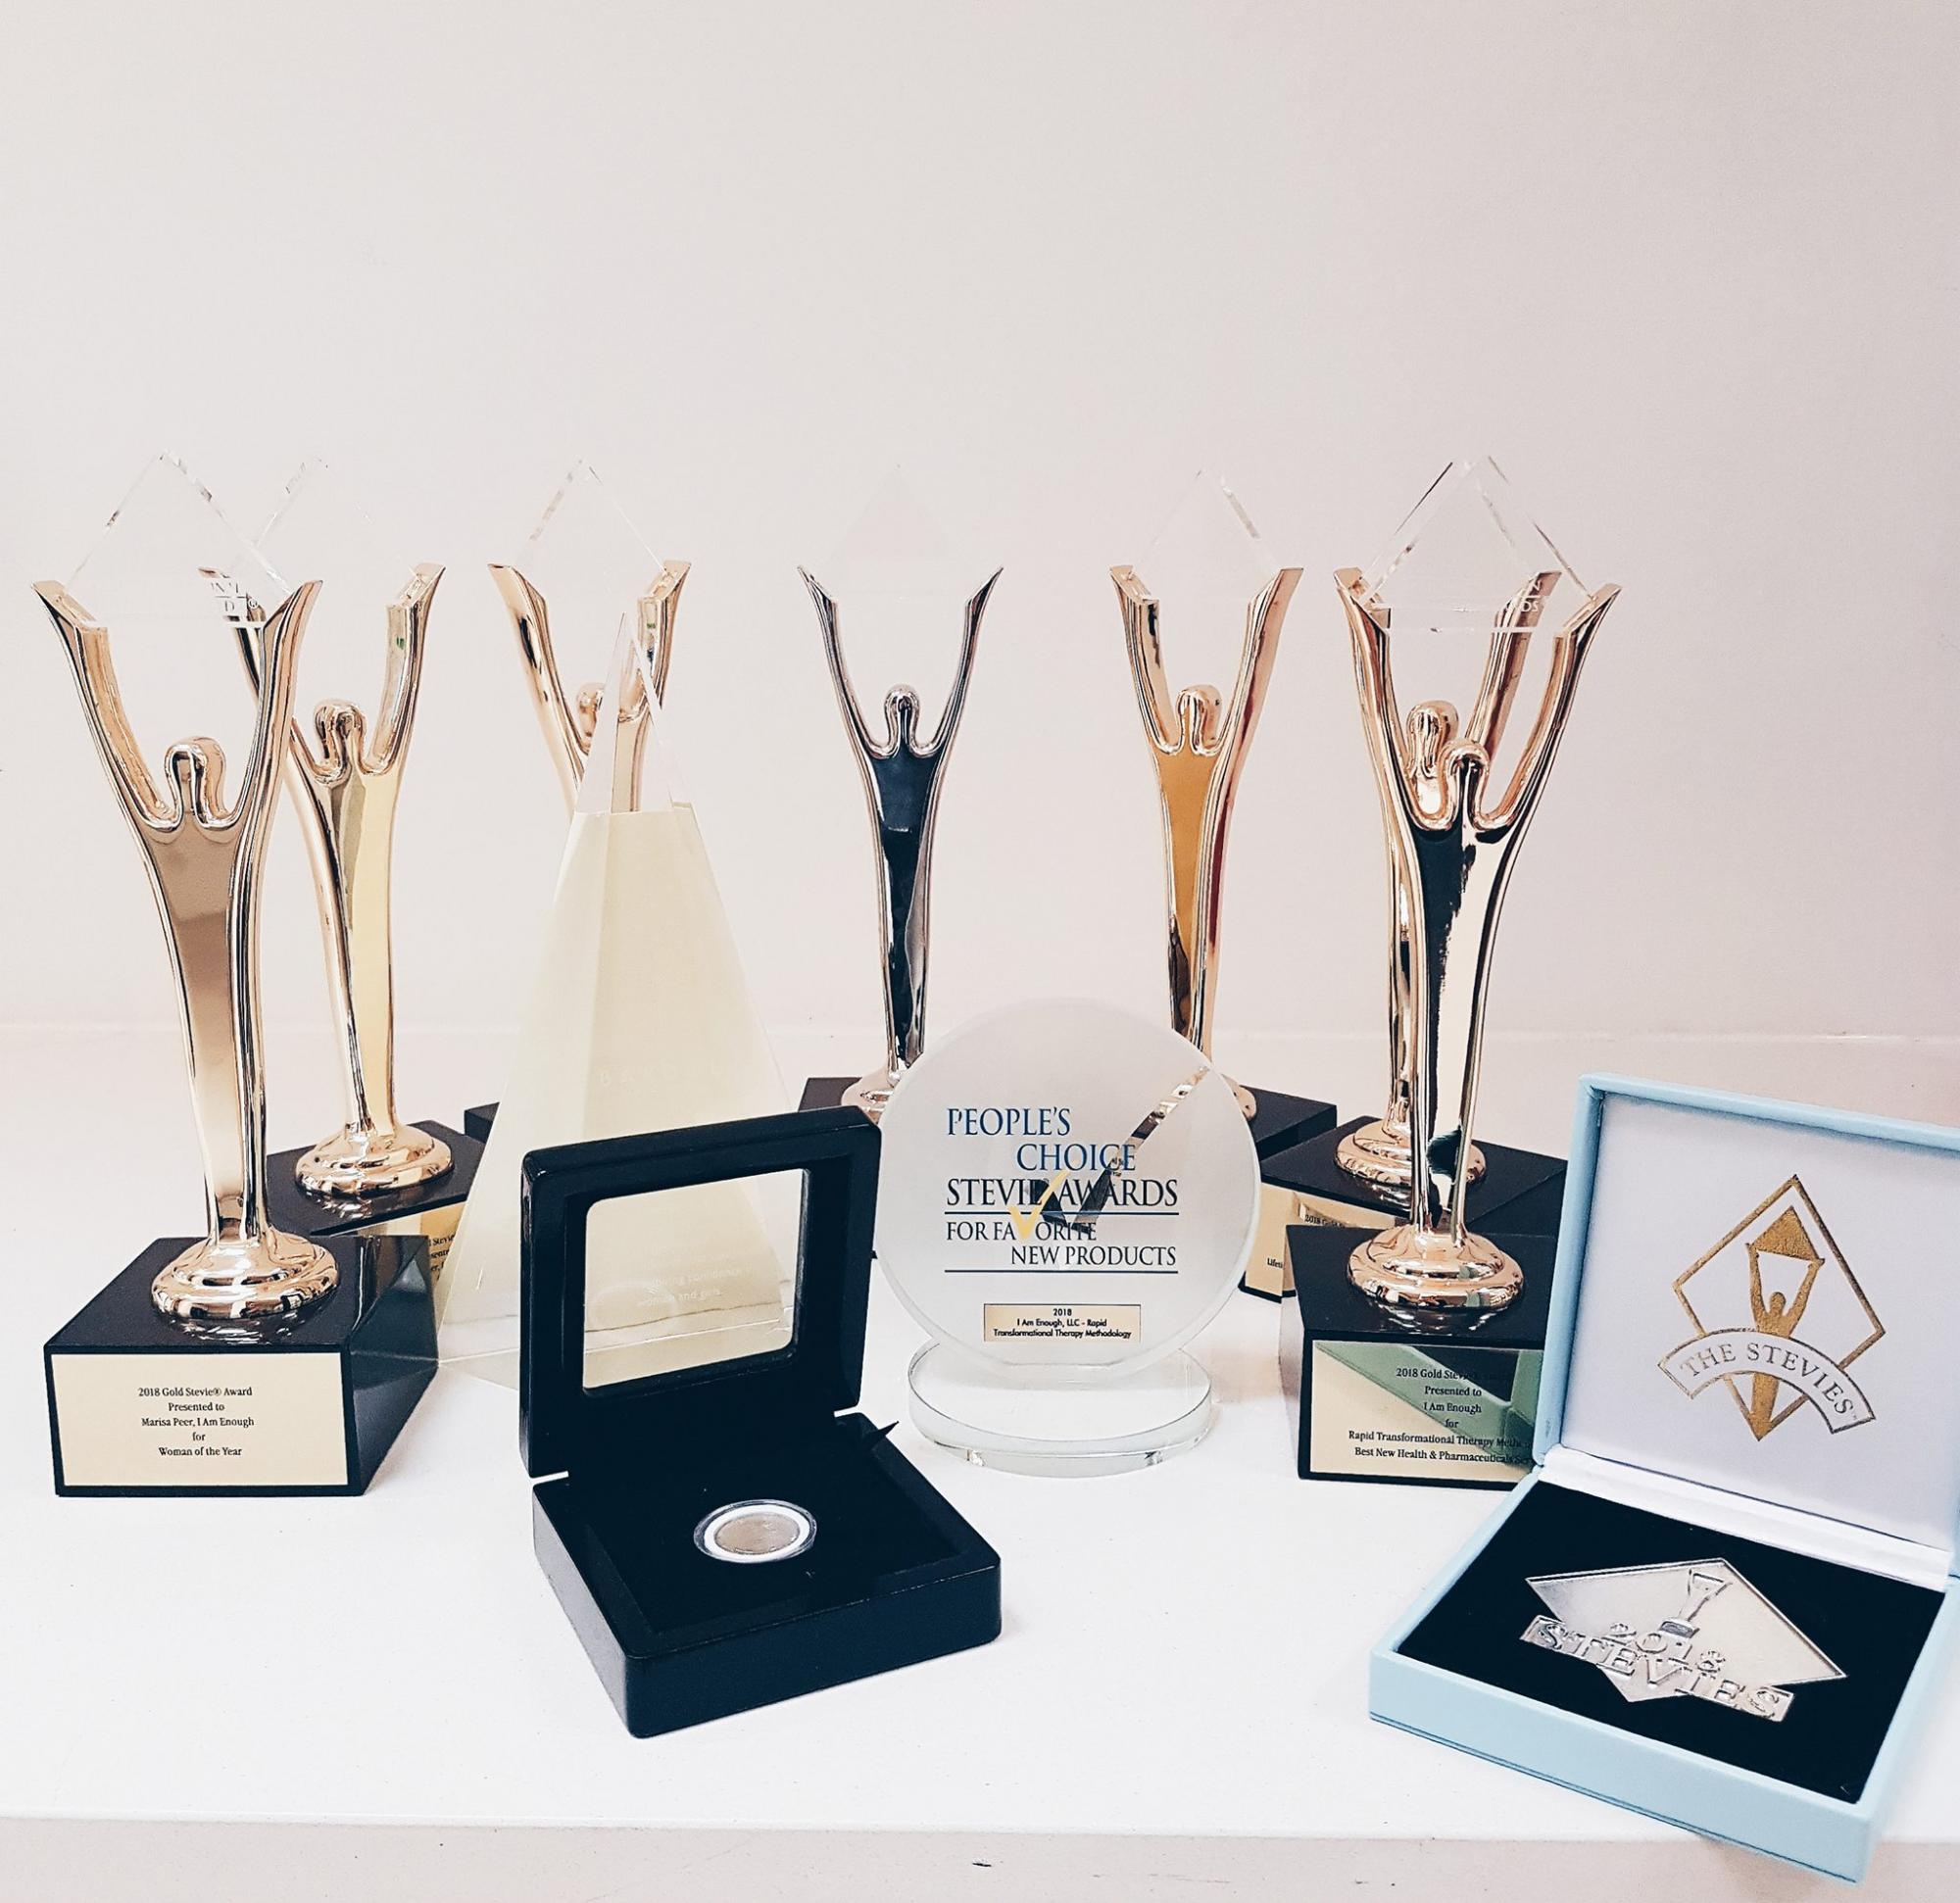 Awards of Anna's RTT Therapist - your online reliable therapist